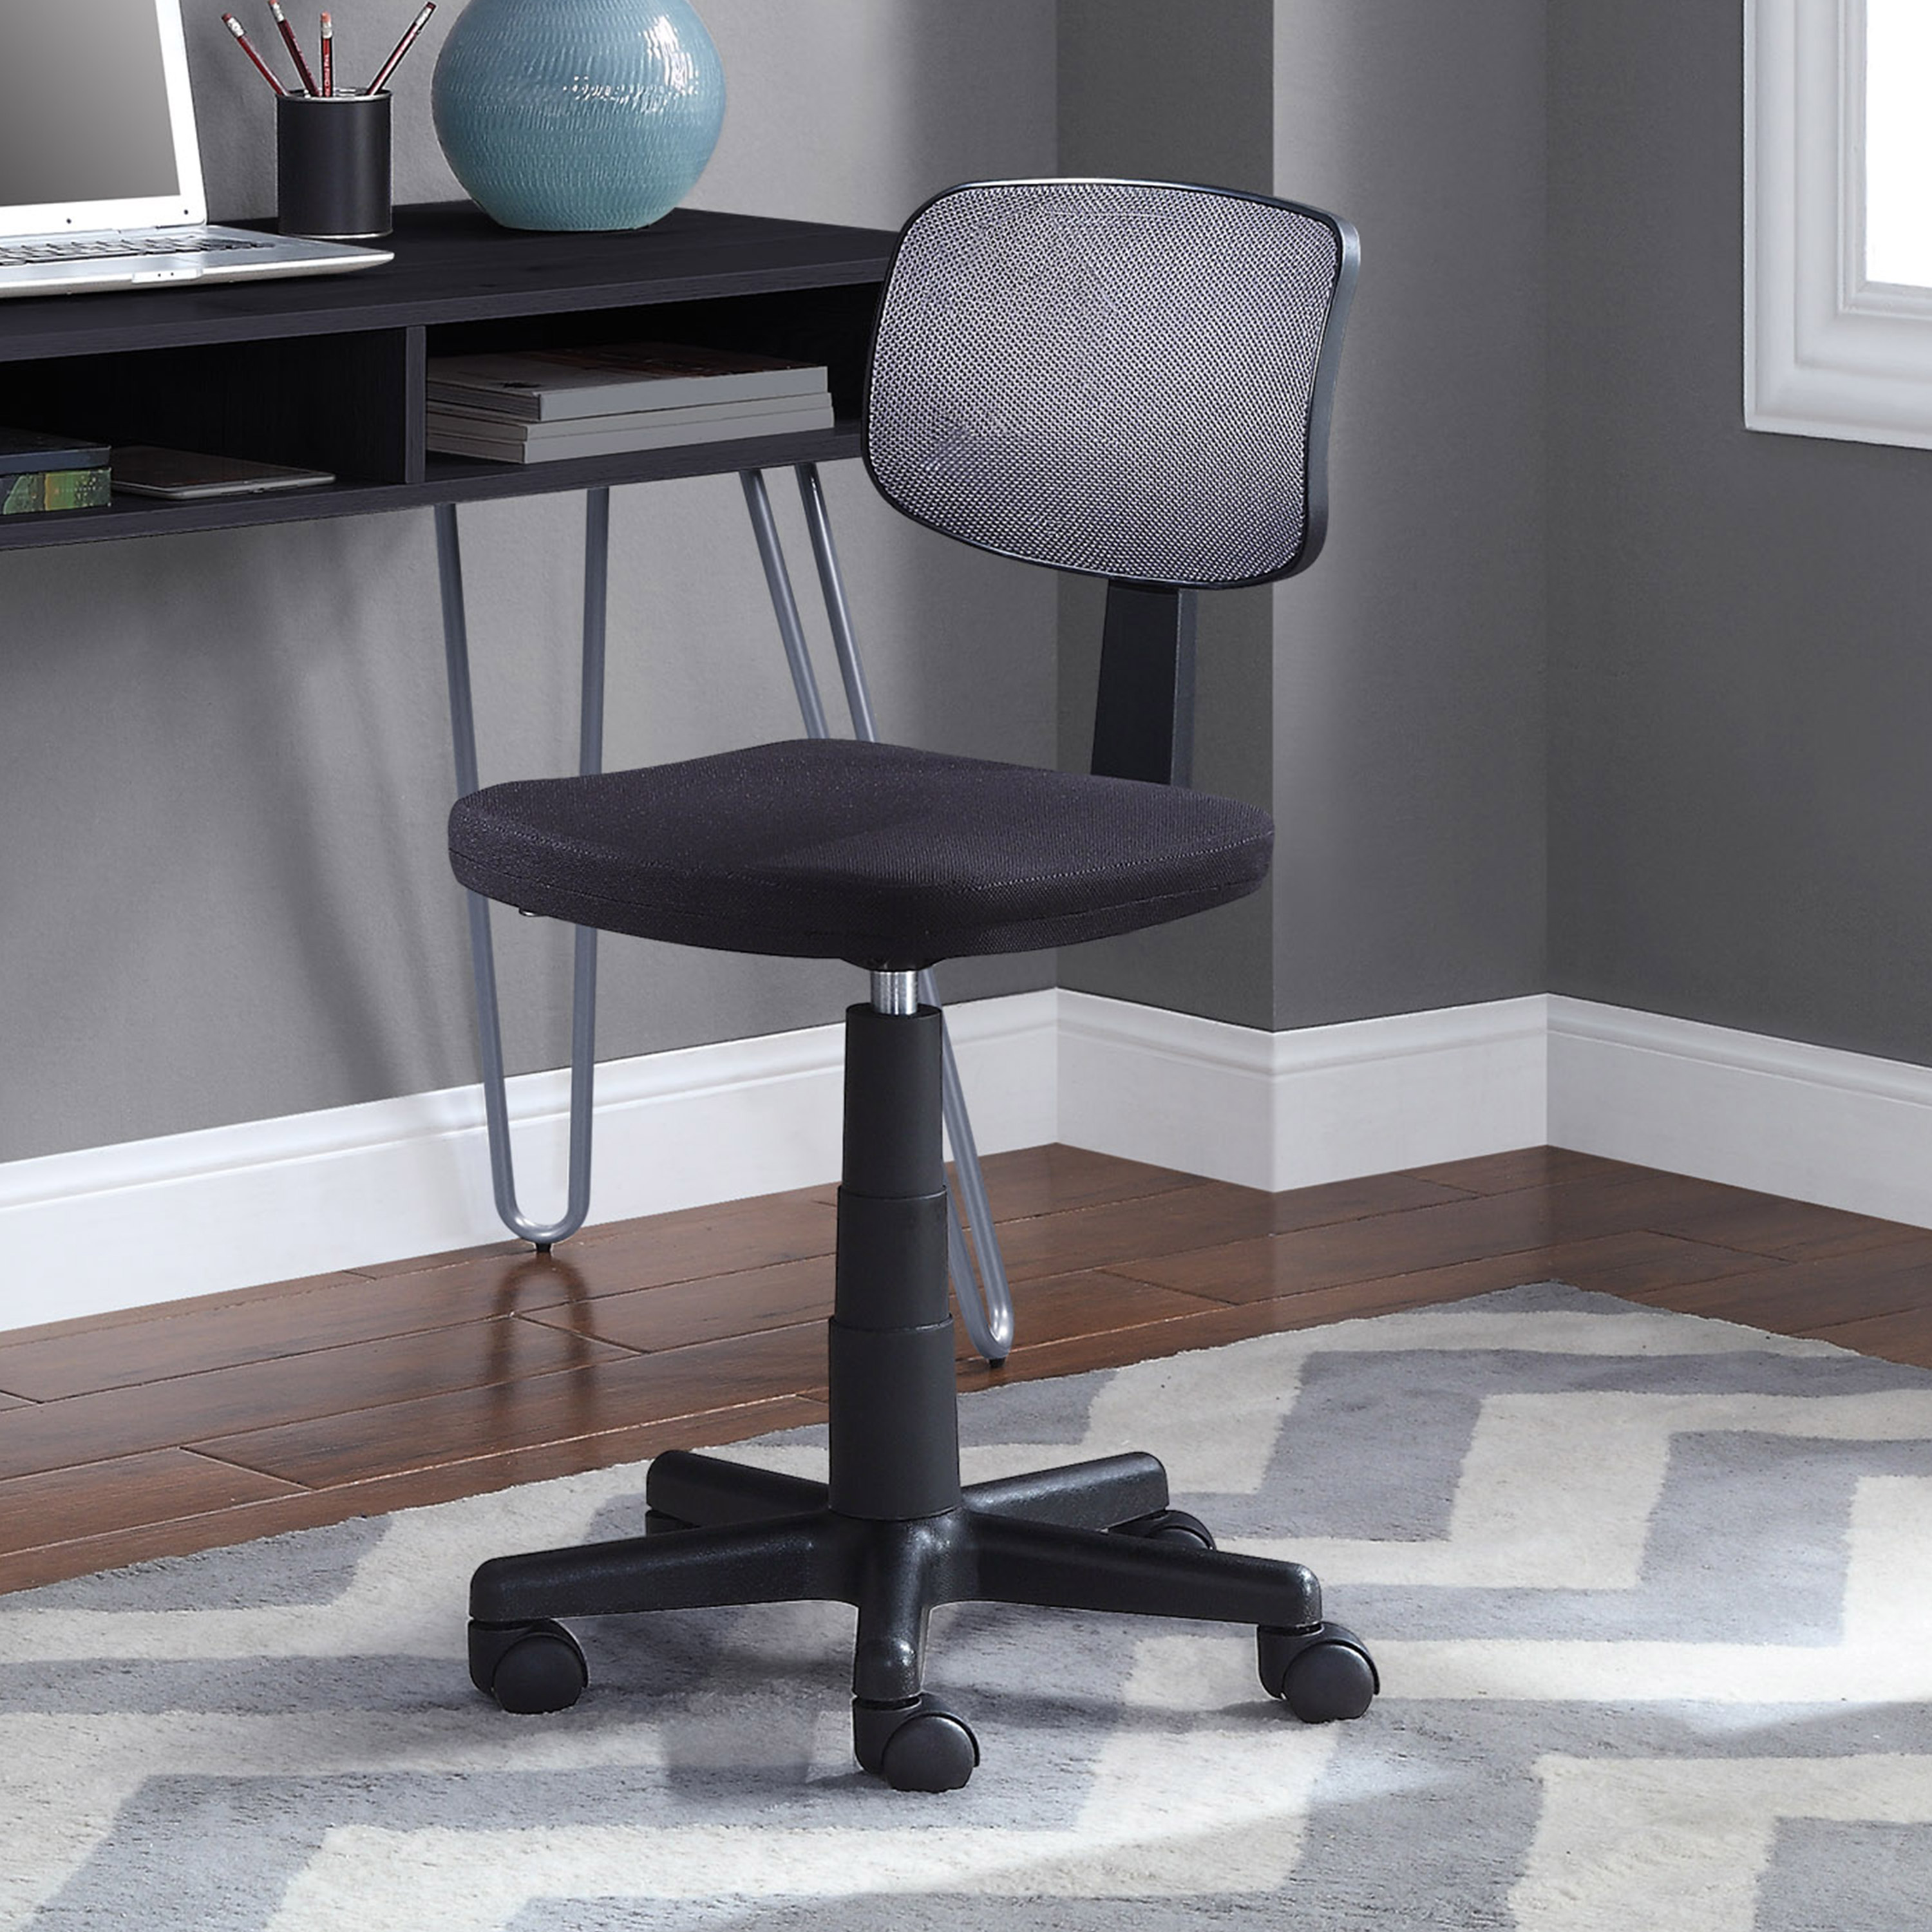 Mainstays Mesh Task Chair with Plush Padded Seat, Gray - image 1 of 9